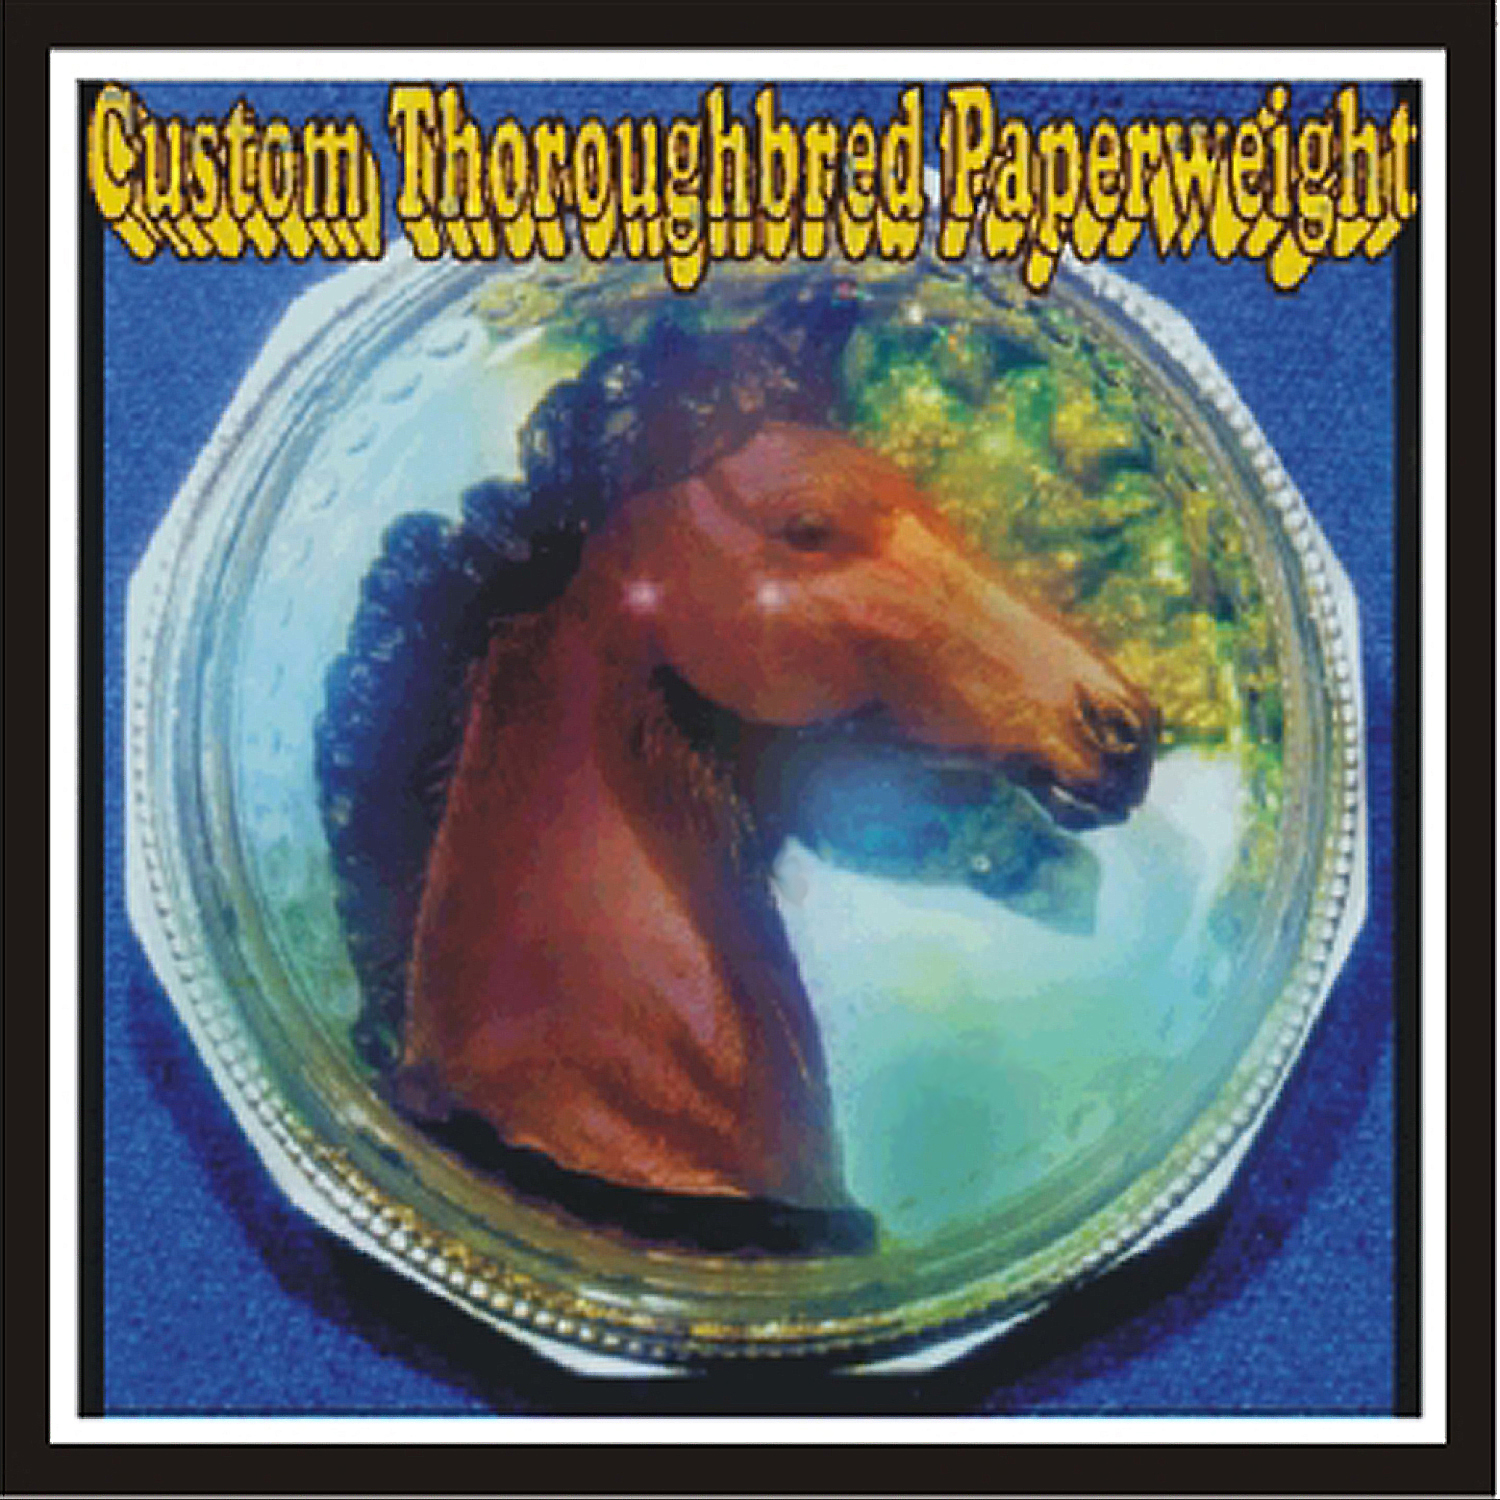 CUSTOM PAINTED THOROUGHBRED OR QUARTER-HORSE PAPERWEIGHTS